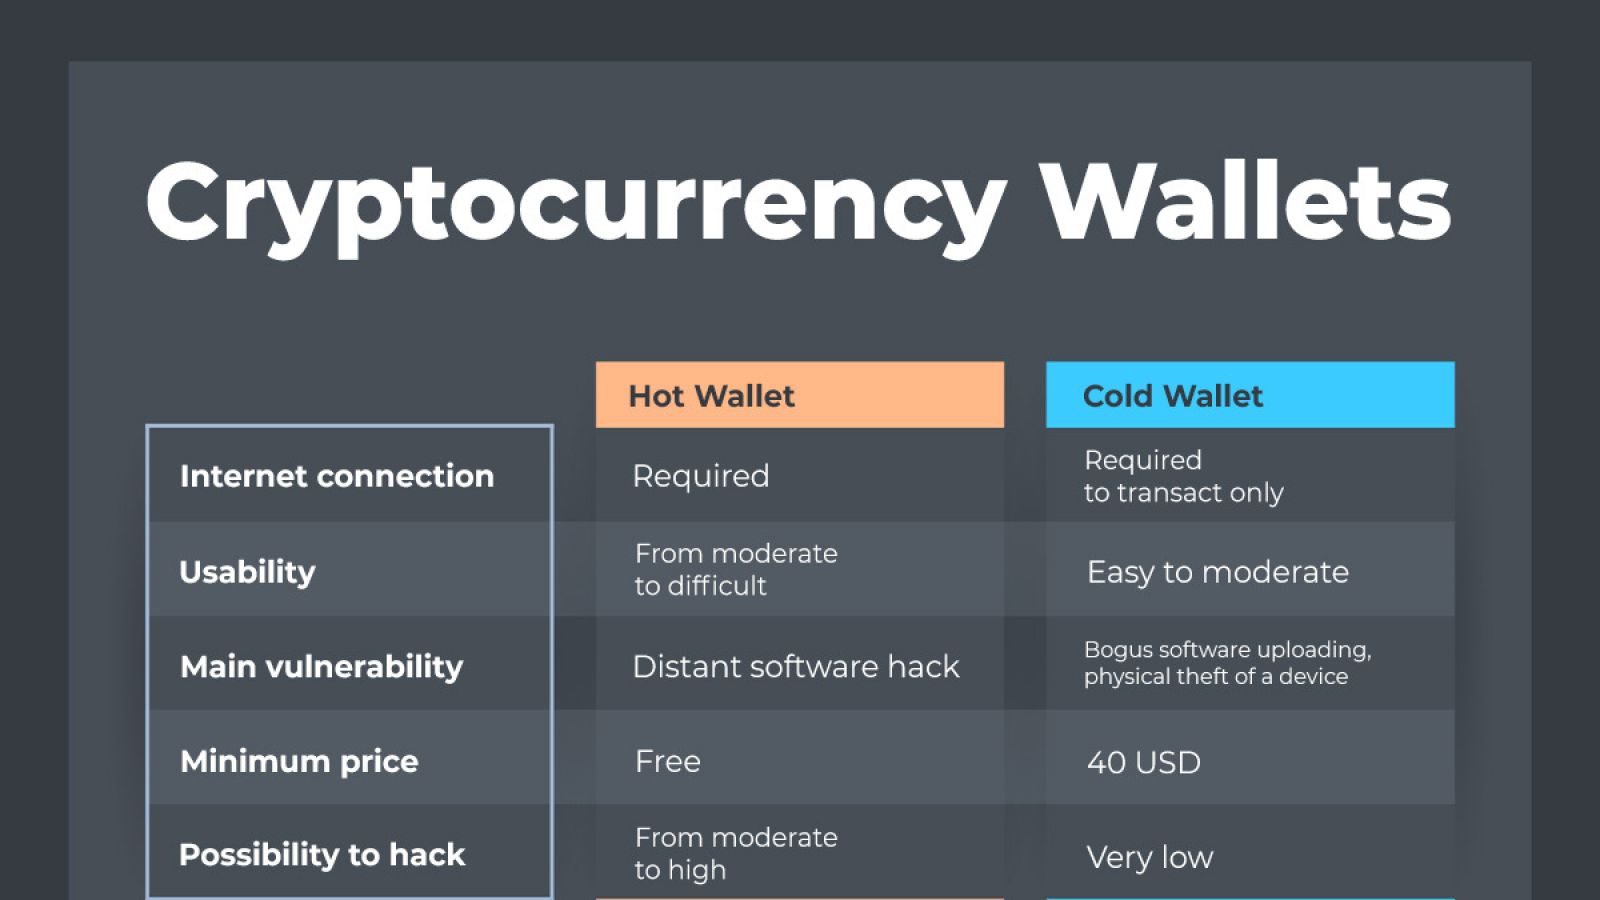 Cryptocurrency Wallets 2020